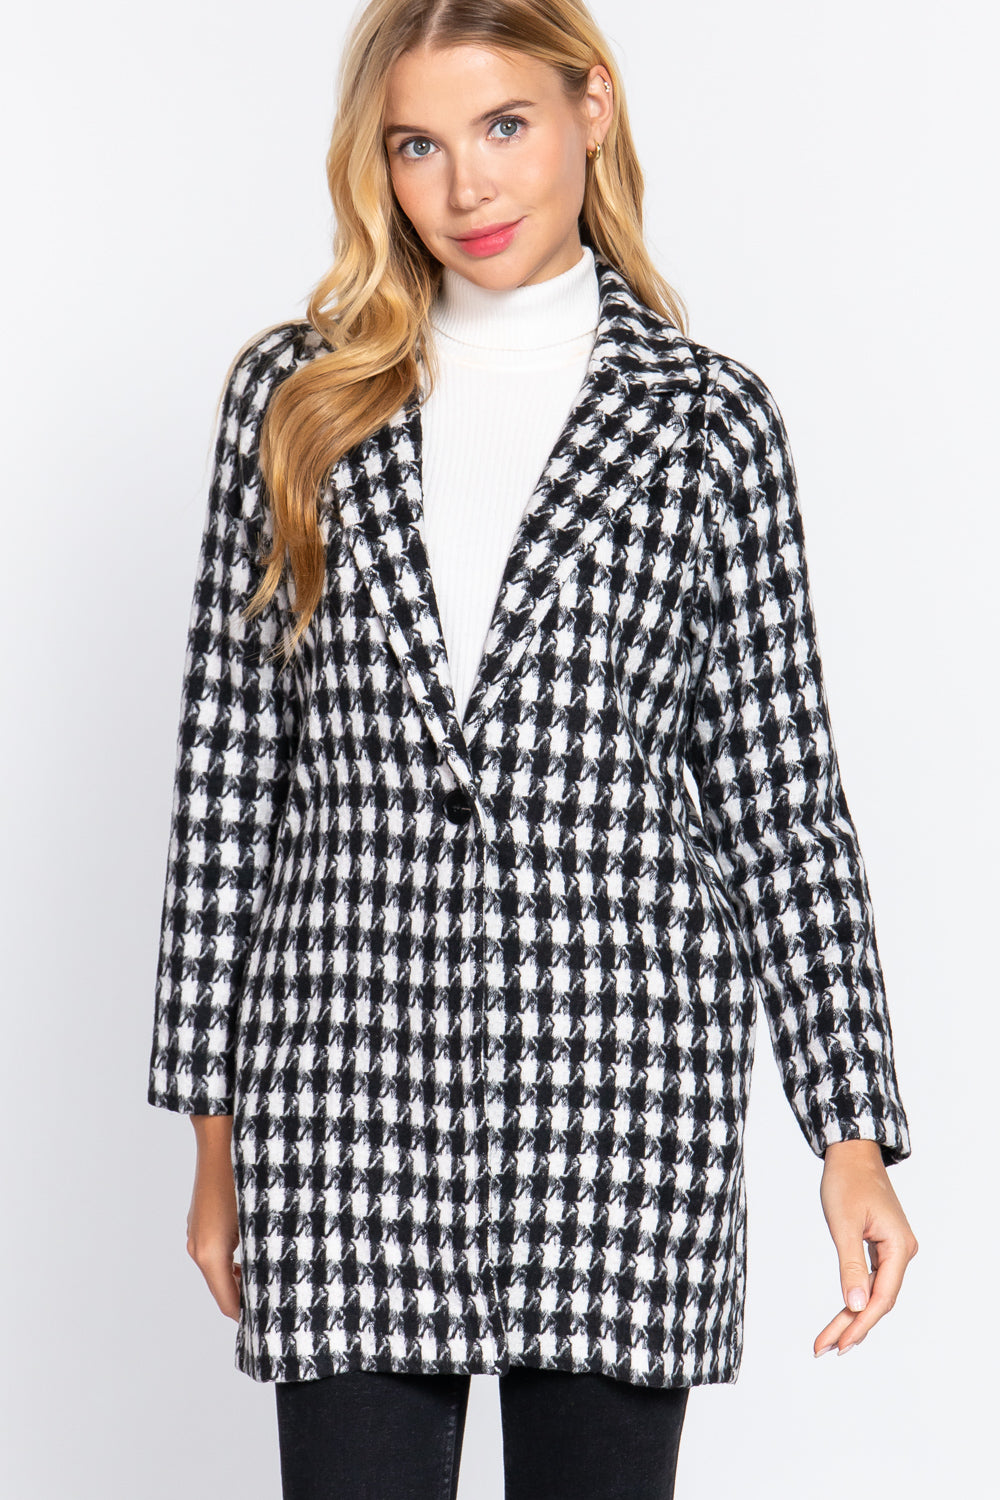 Long Slv One Button Jacquard Jacket - women's jacket at TFC&H Co.